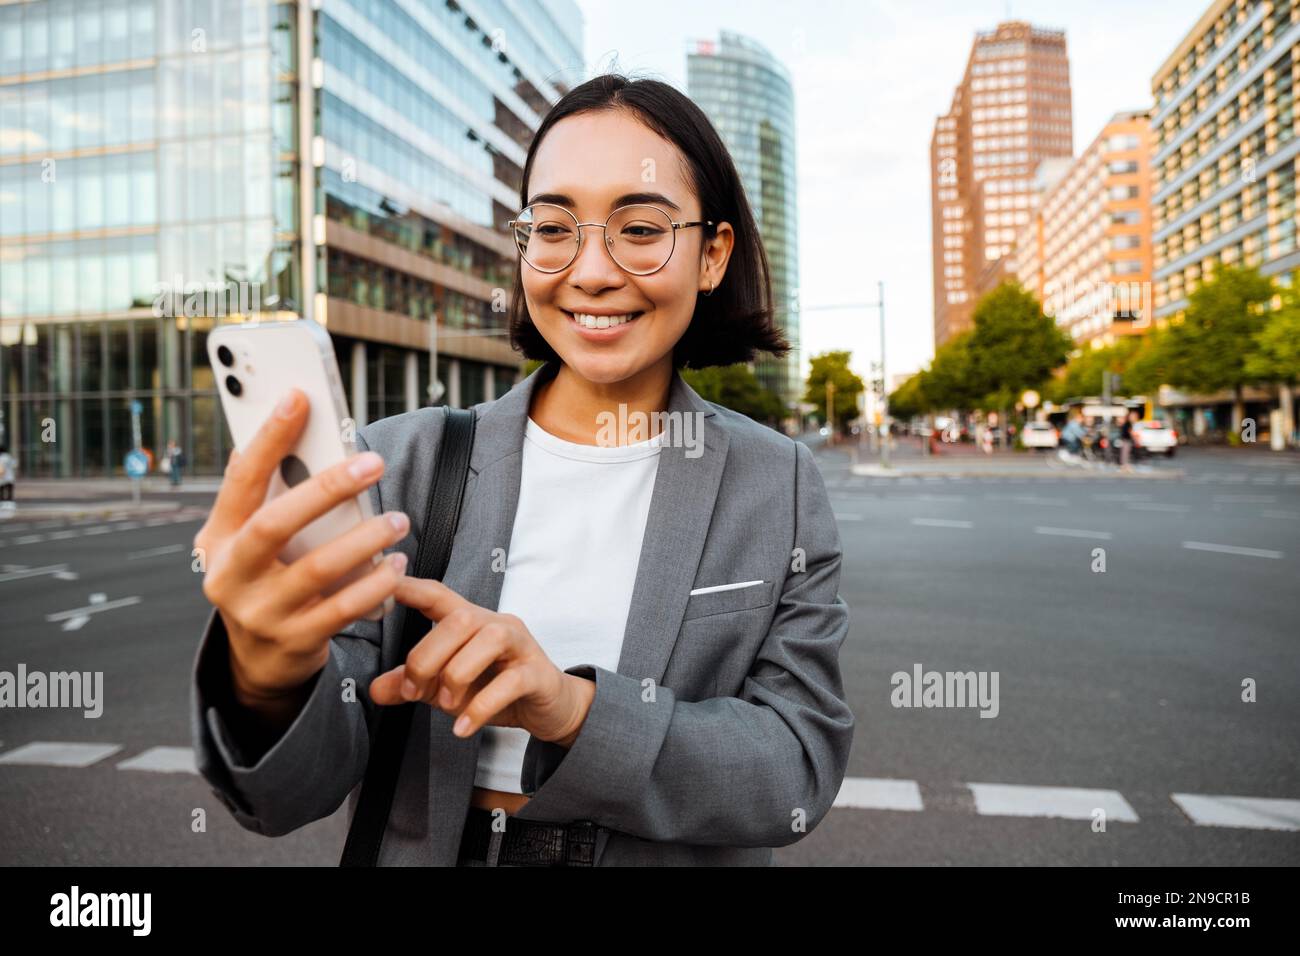 Yound asian woman using cellphone and smiling while standing outdoors at the city street Stock Photo